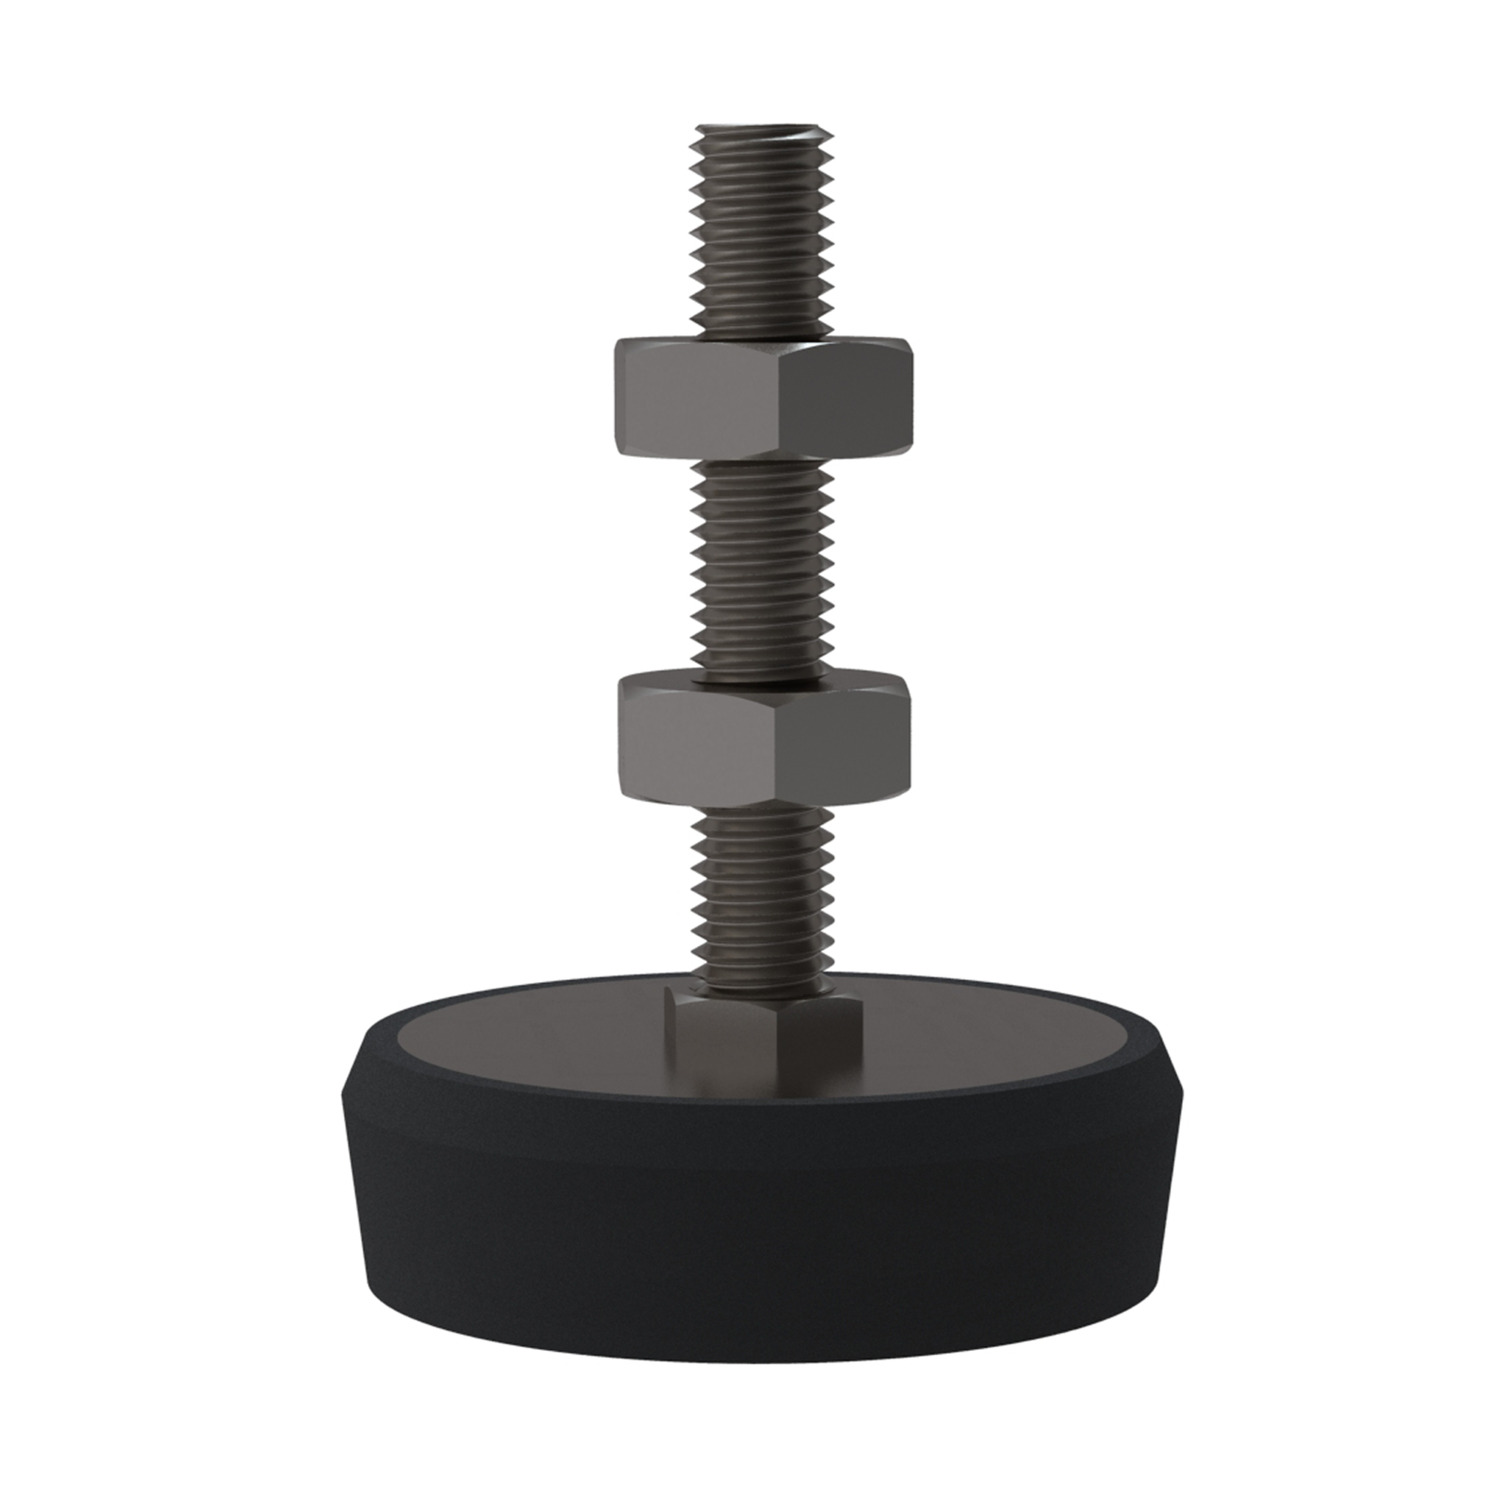 Product P2160, Stainless Machine Mounts rubber base rubber base / 